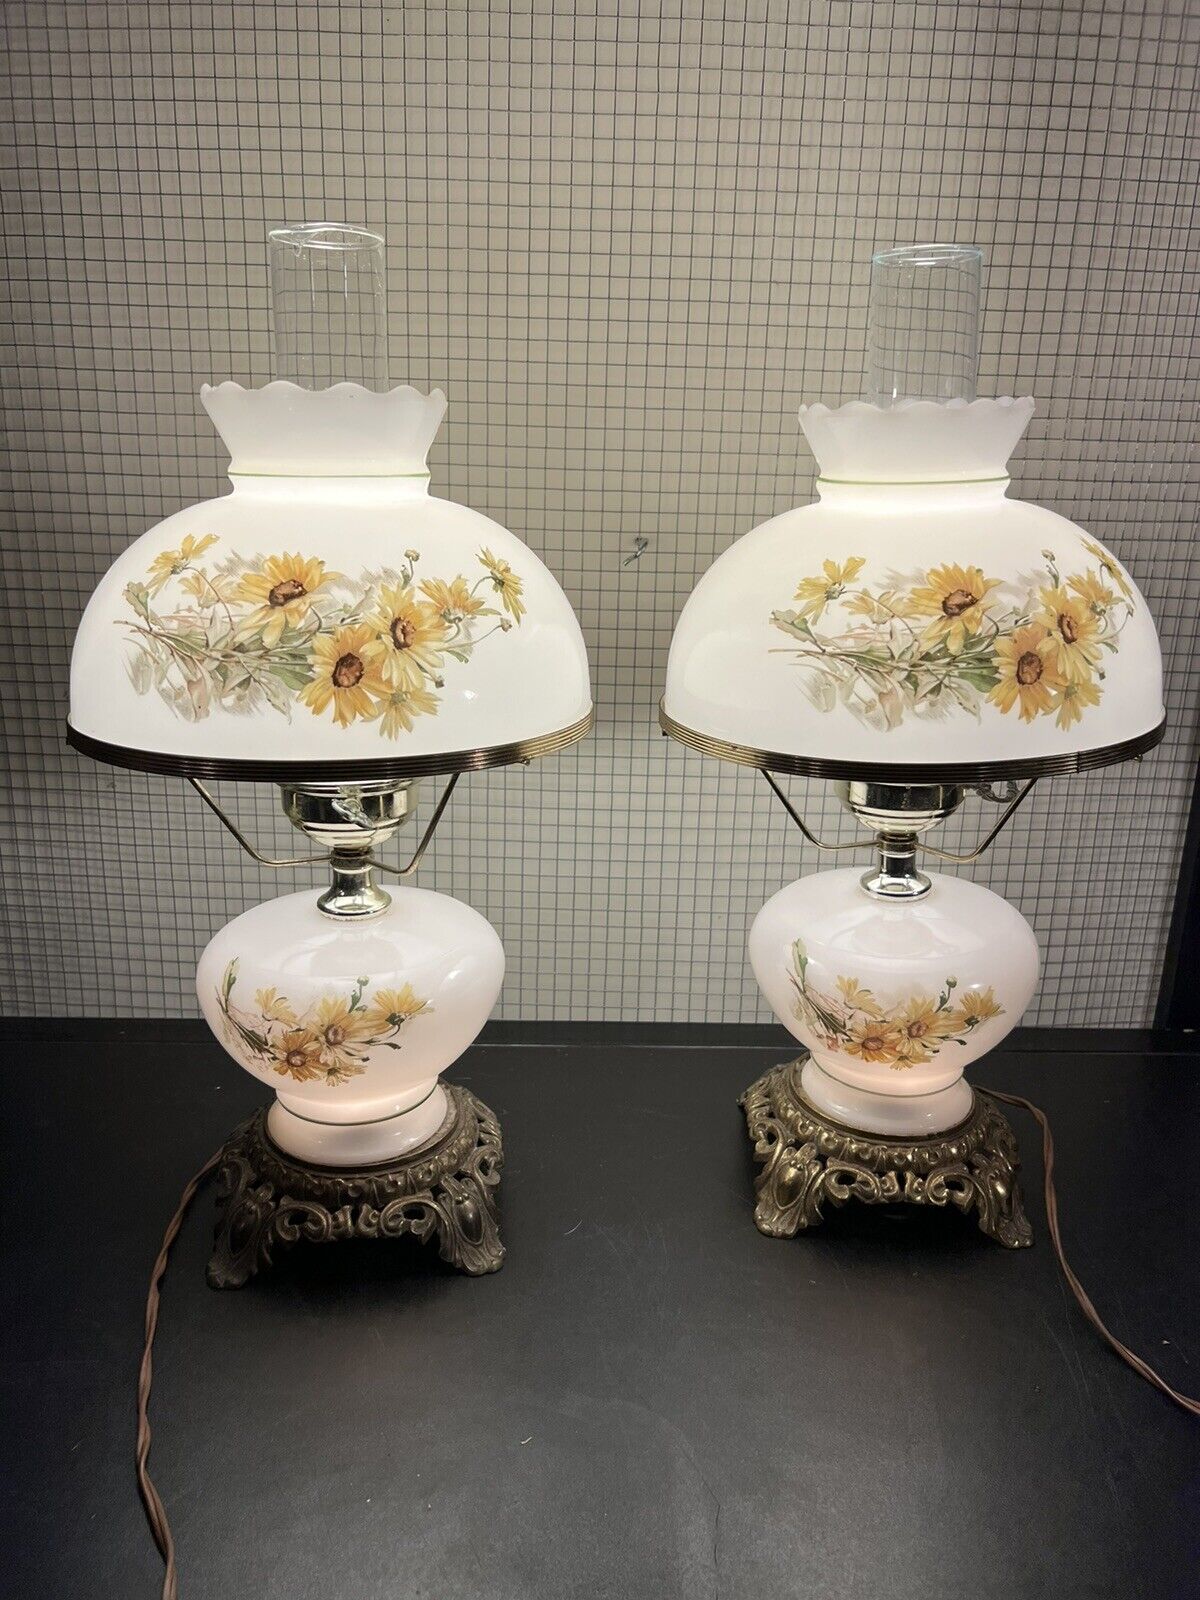 Vintage Pair Of Double Globe Hurricane Lamps 3 Way Floral Milk Glass Shade Works